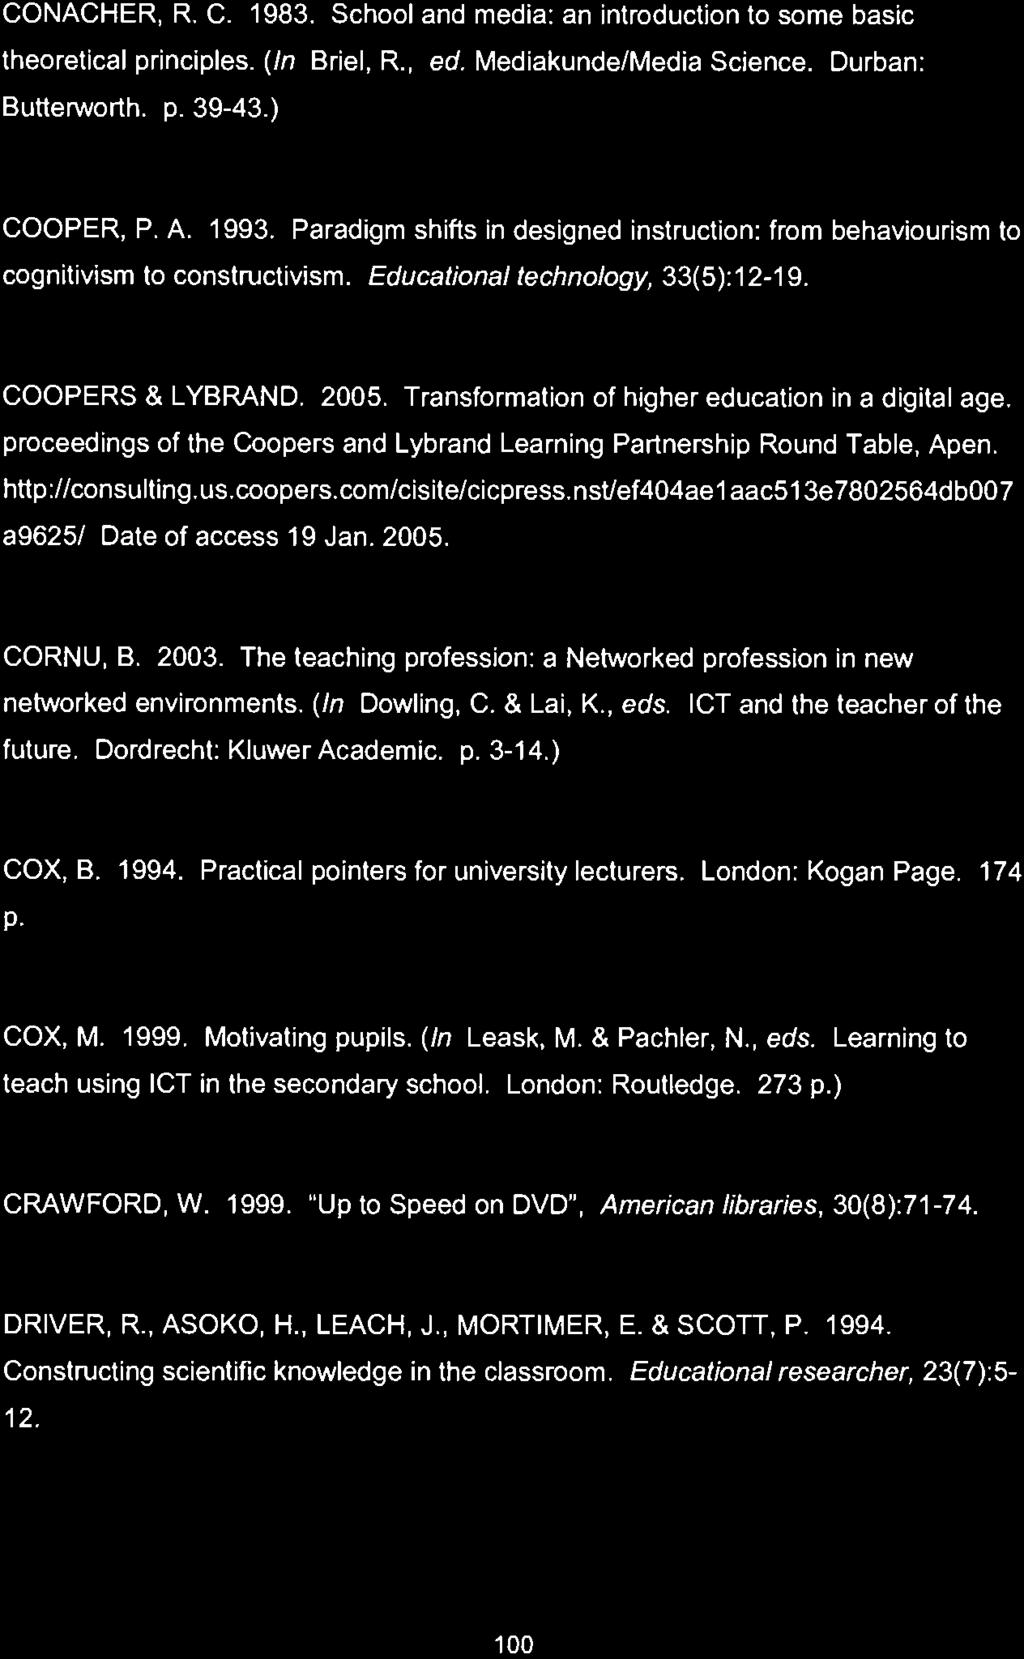 Transformation of higher education in a digital age. proceedings of the Coopers and Lybrand Learning Partnership Round Table, Apen. http:llconsuiting. us.coopers.com/cisitelcicpress.rrstlef404ae?